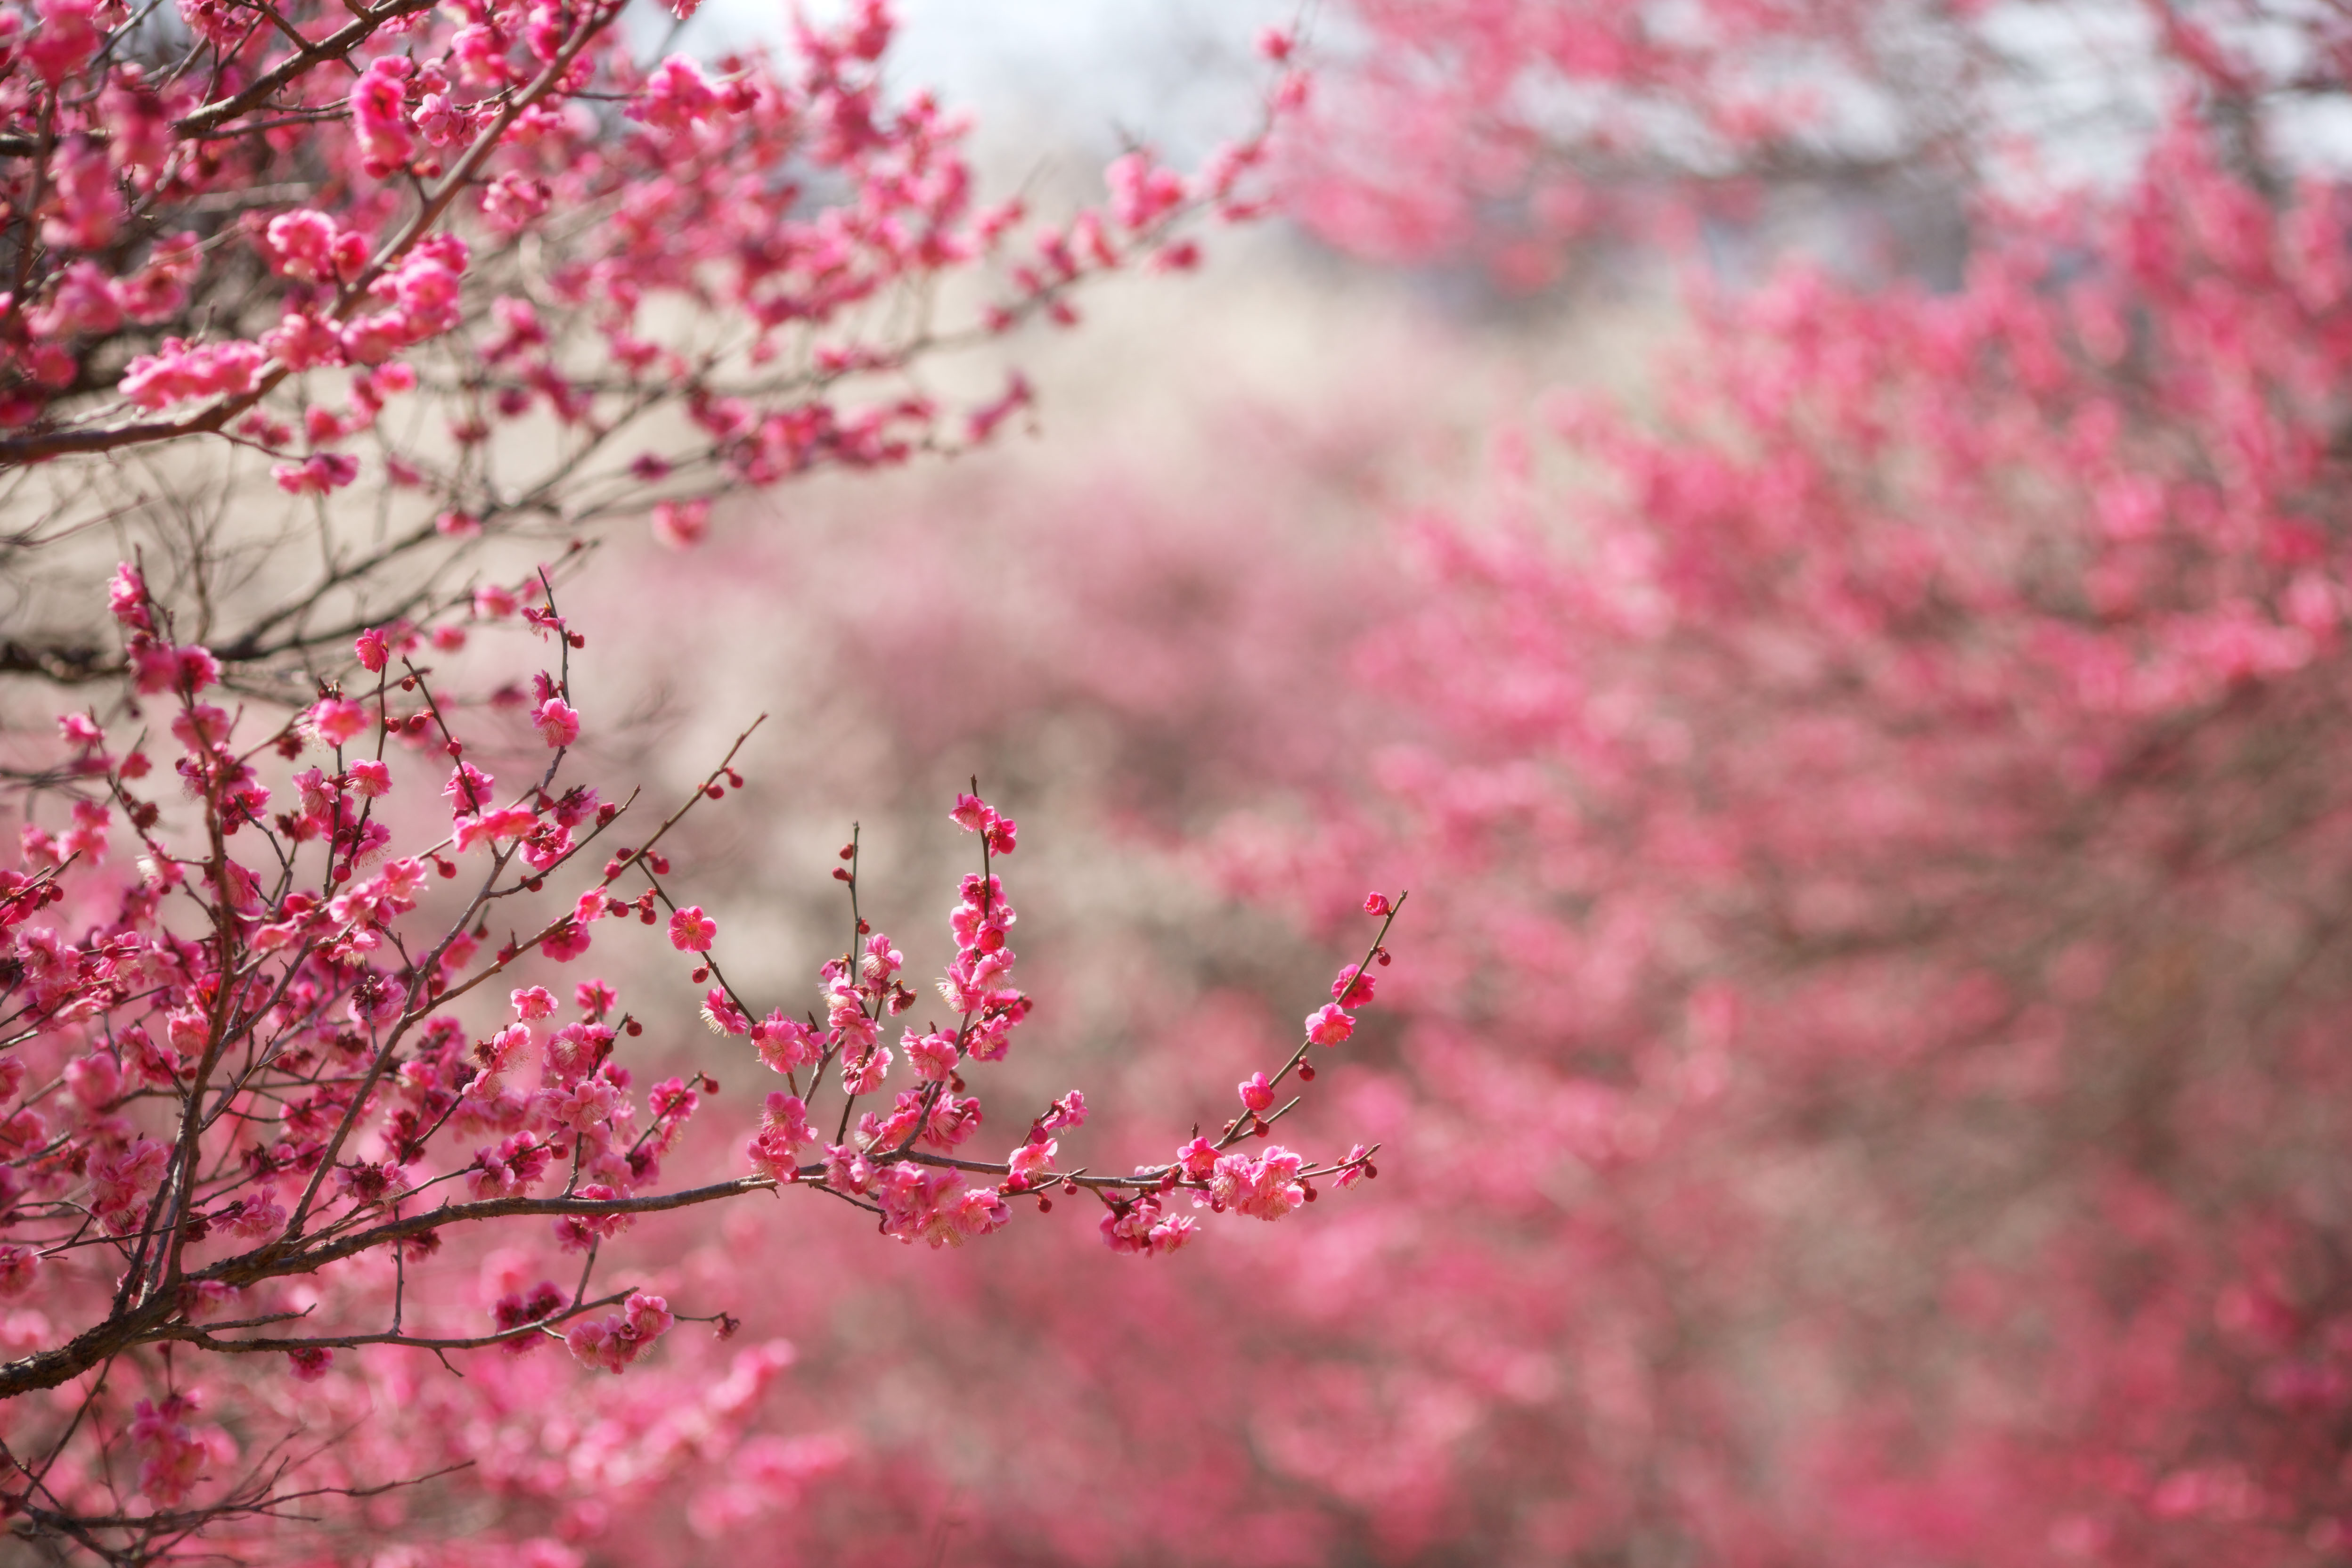 photo,material,free,landscape,picture,stock photo,Creative Commons,Plum Orchard's Red Plum Flower, UME, Plums, Plum, Branch